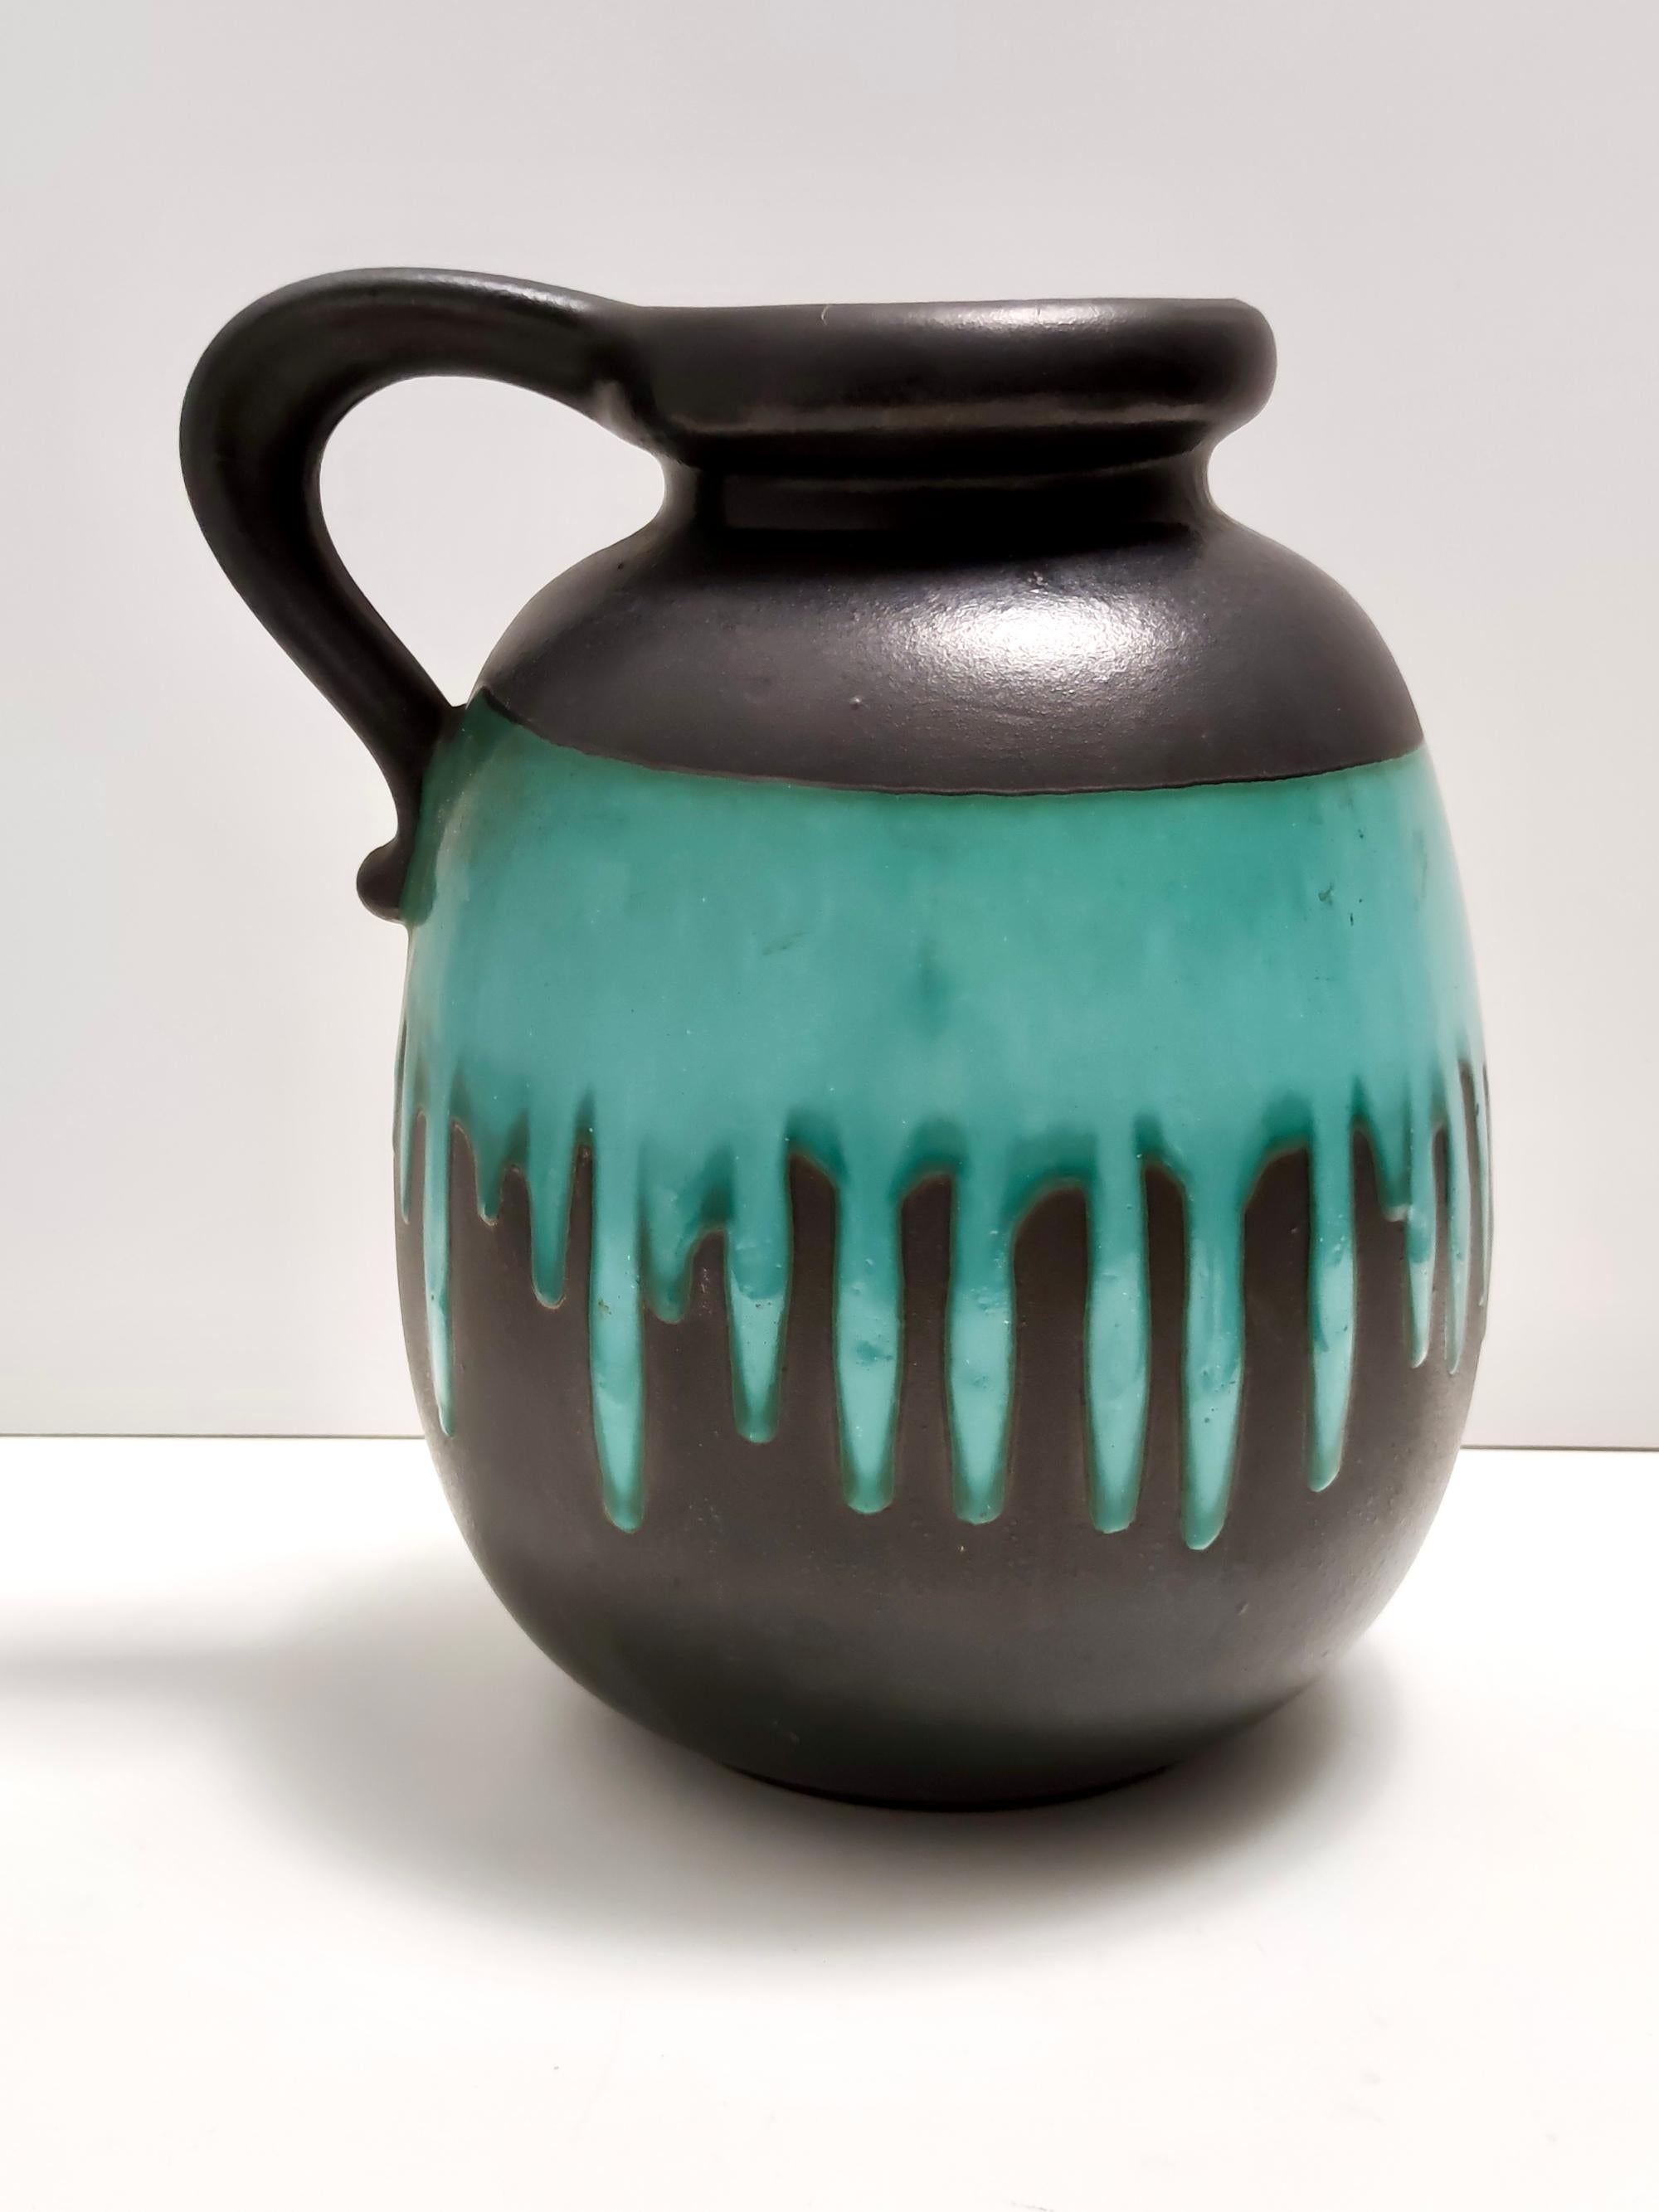 Vintage Black and Teal Fat Lava Ceramic Vase Multi-Color 484-30 Scheurich WGP In Excellent Condition For Sale In Bresso, Lombardy